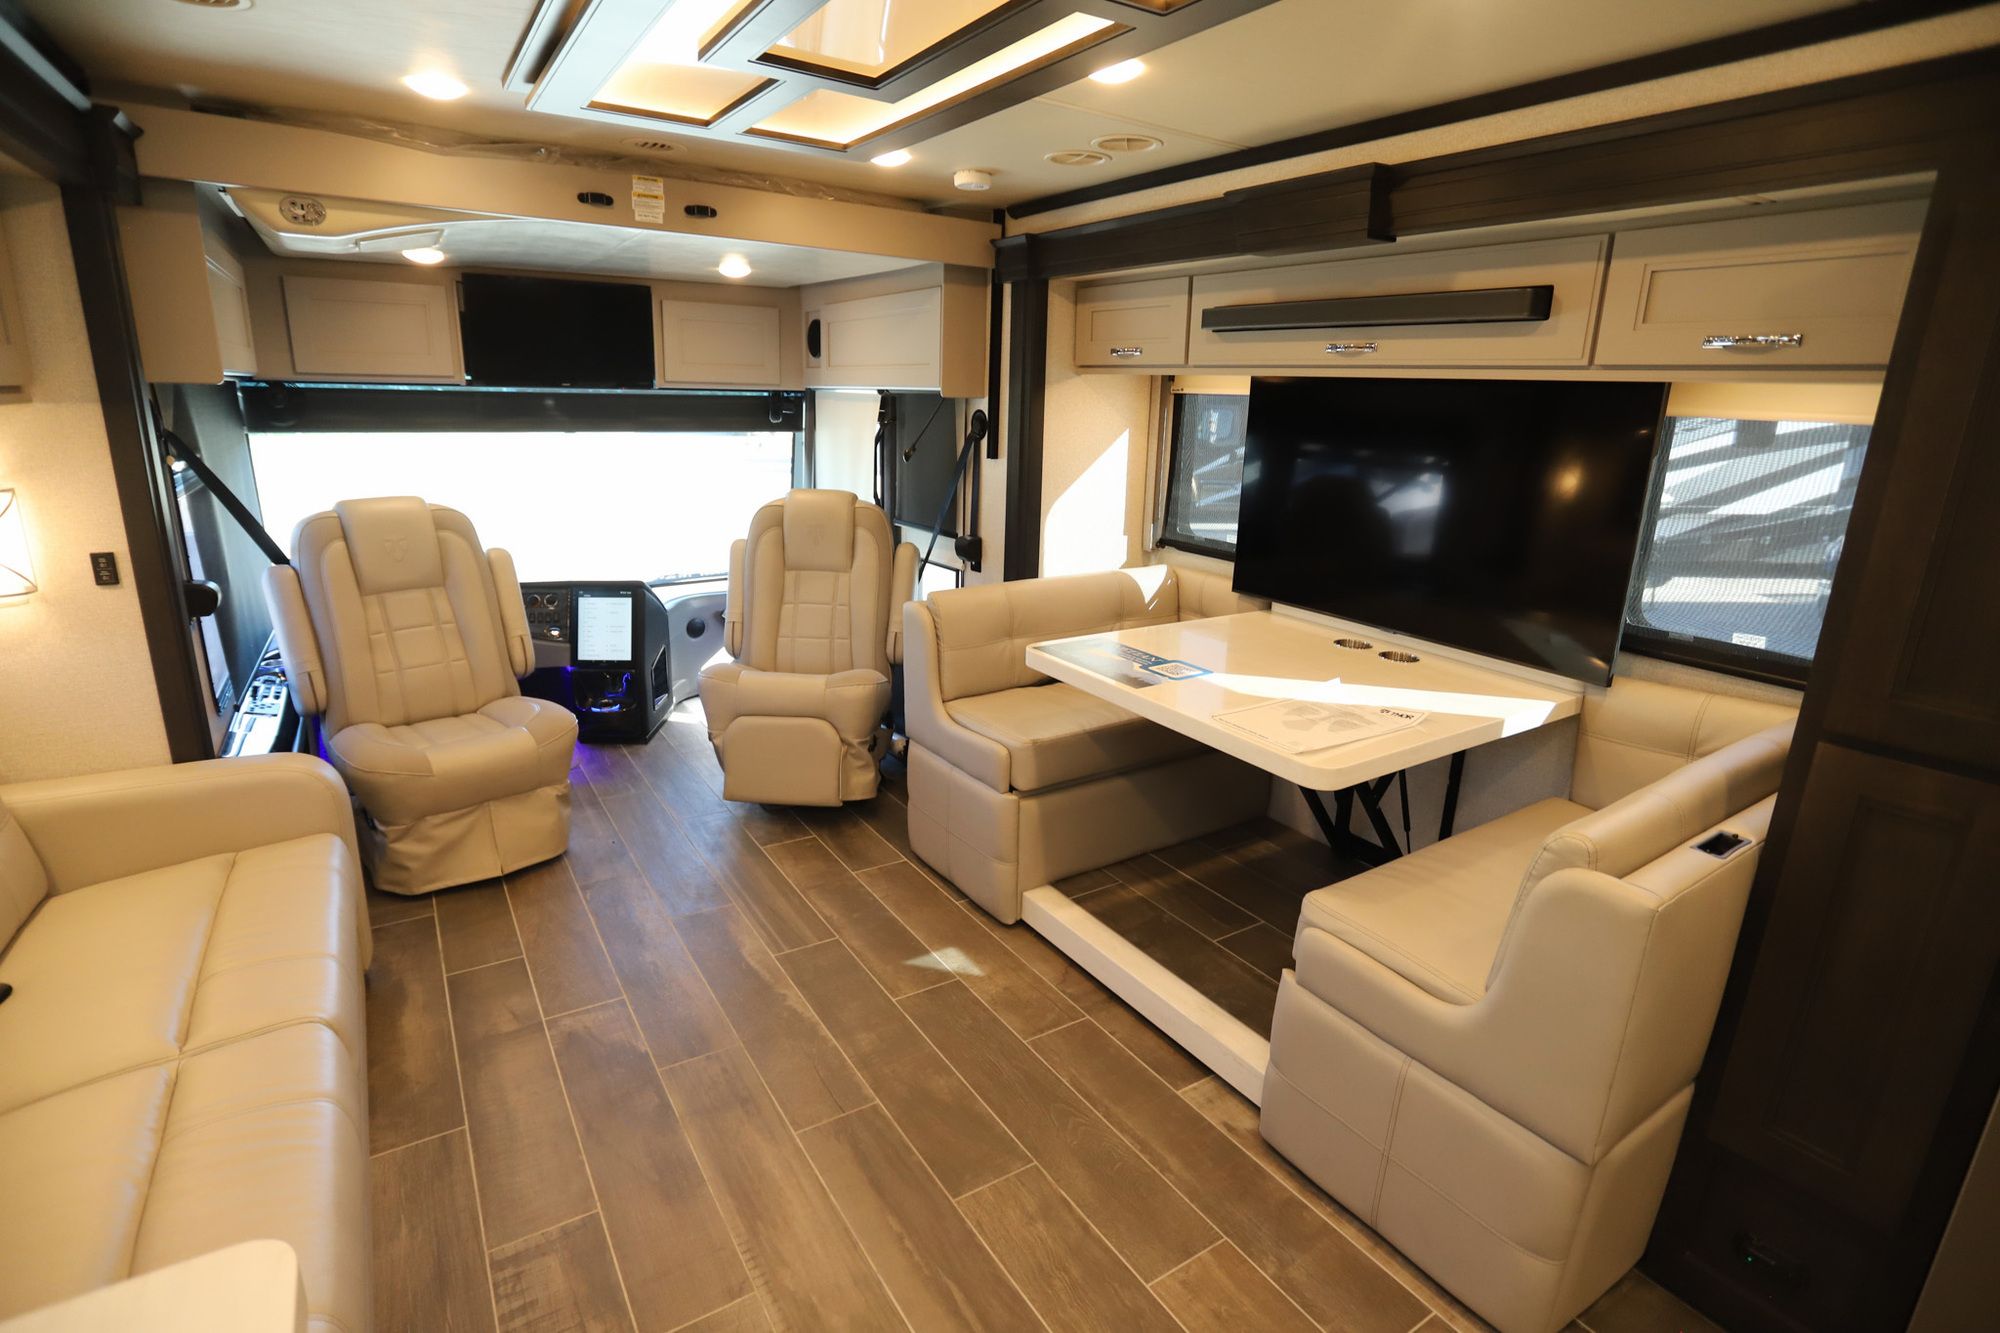 New 2023 Thor Venetian B42 Class A  For Sale